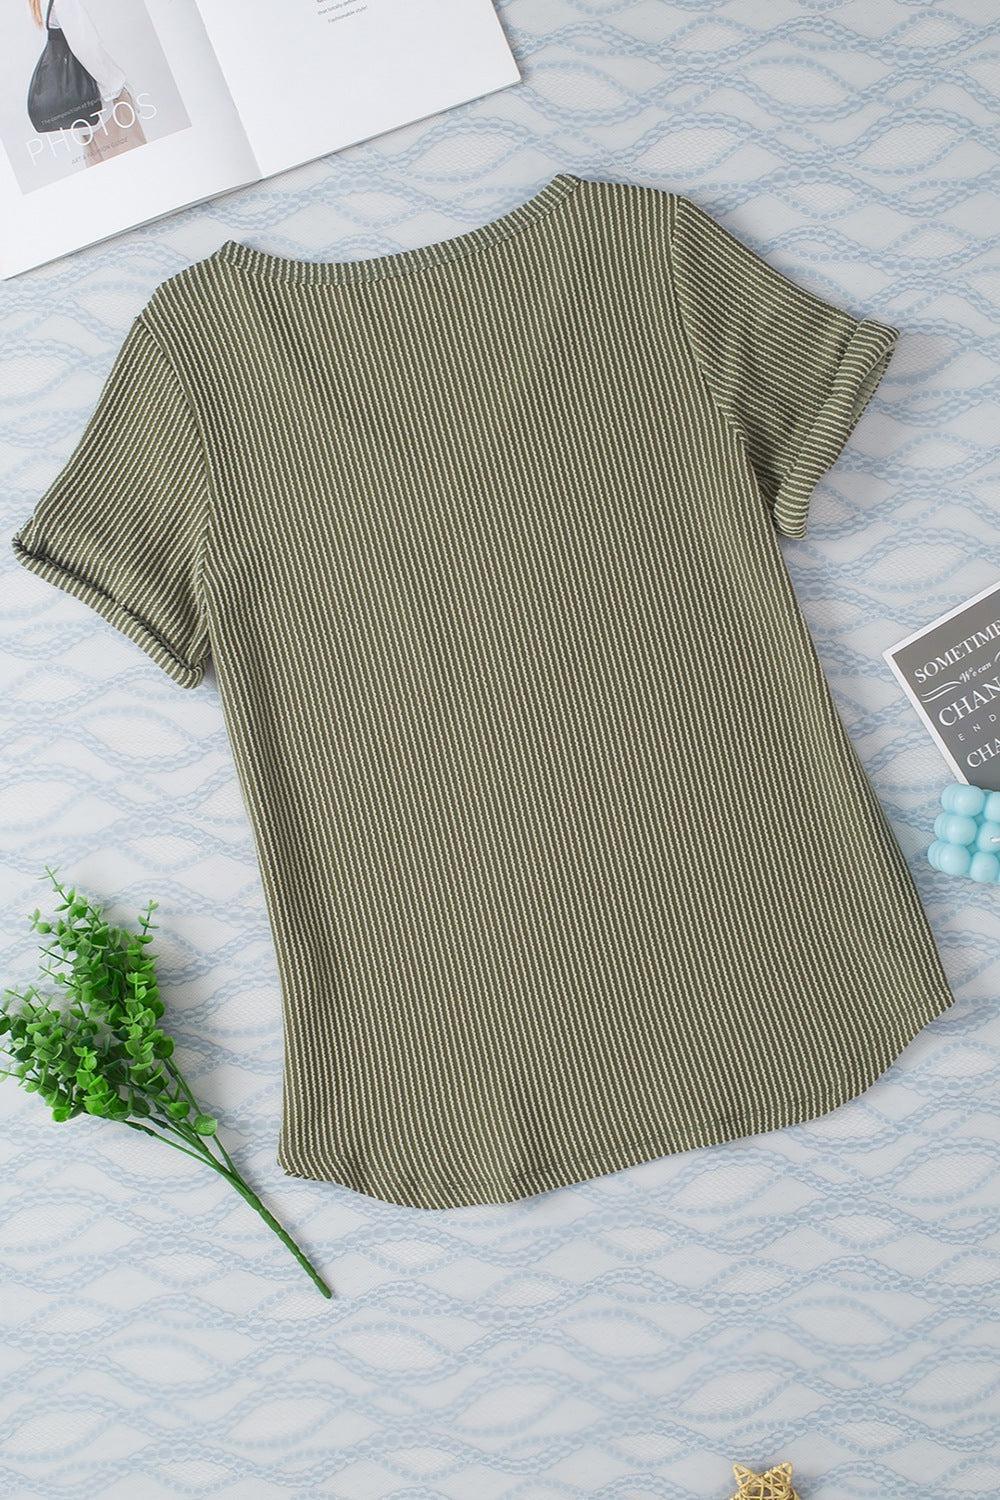 a t - shirt laying on top of a bed next to a flower